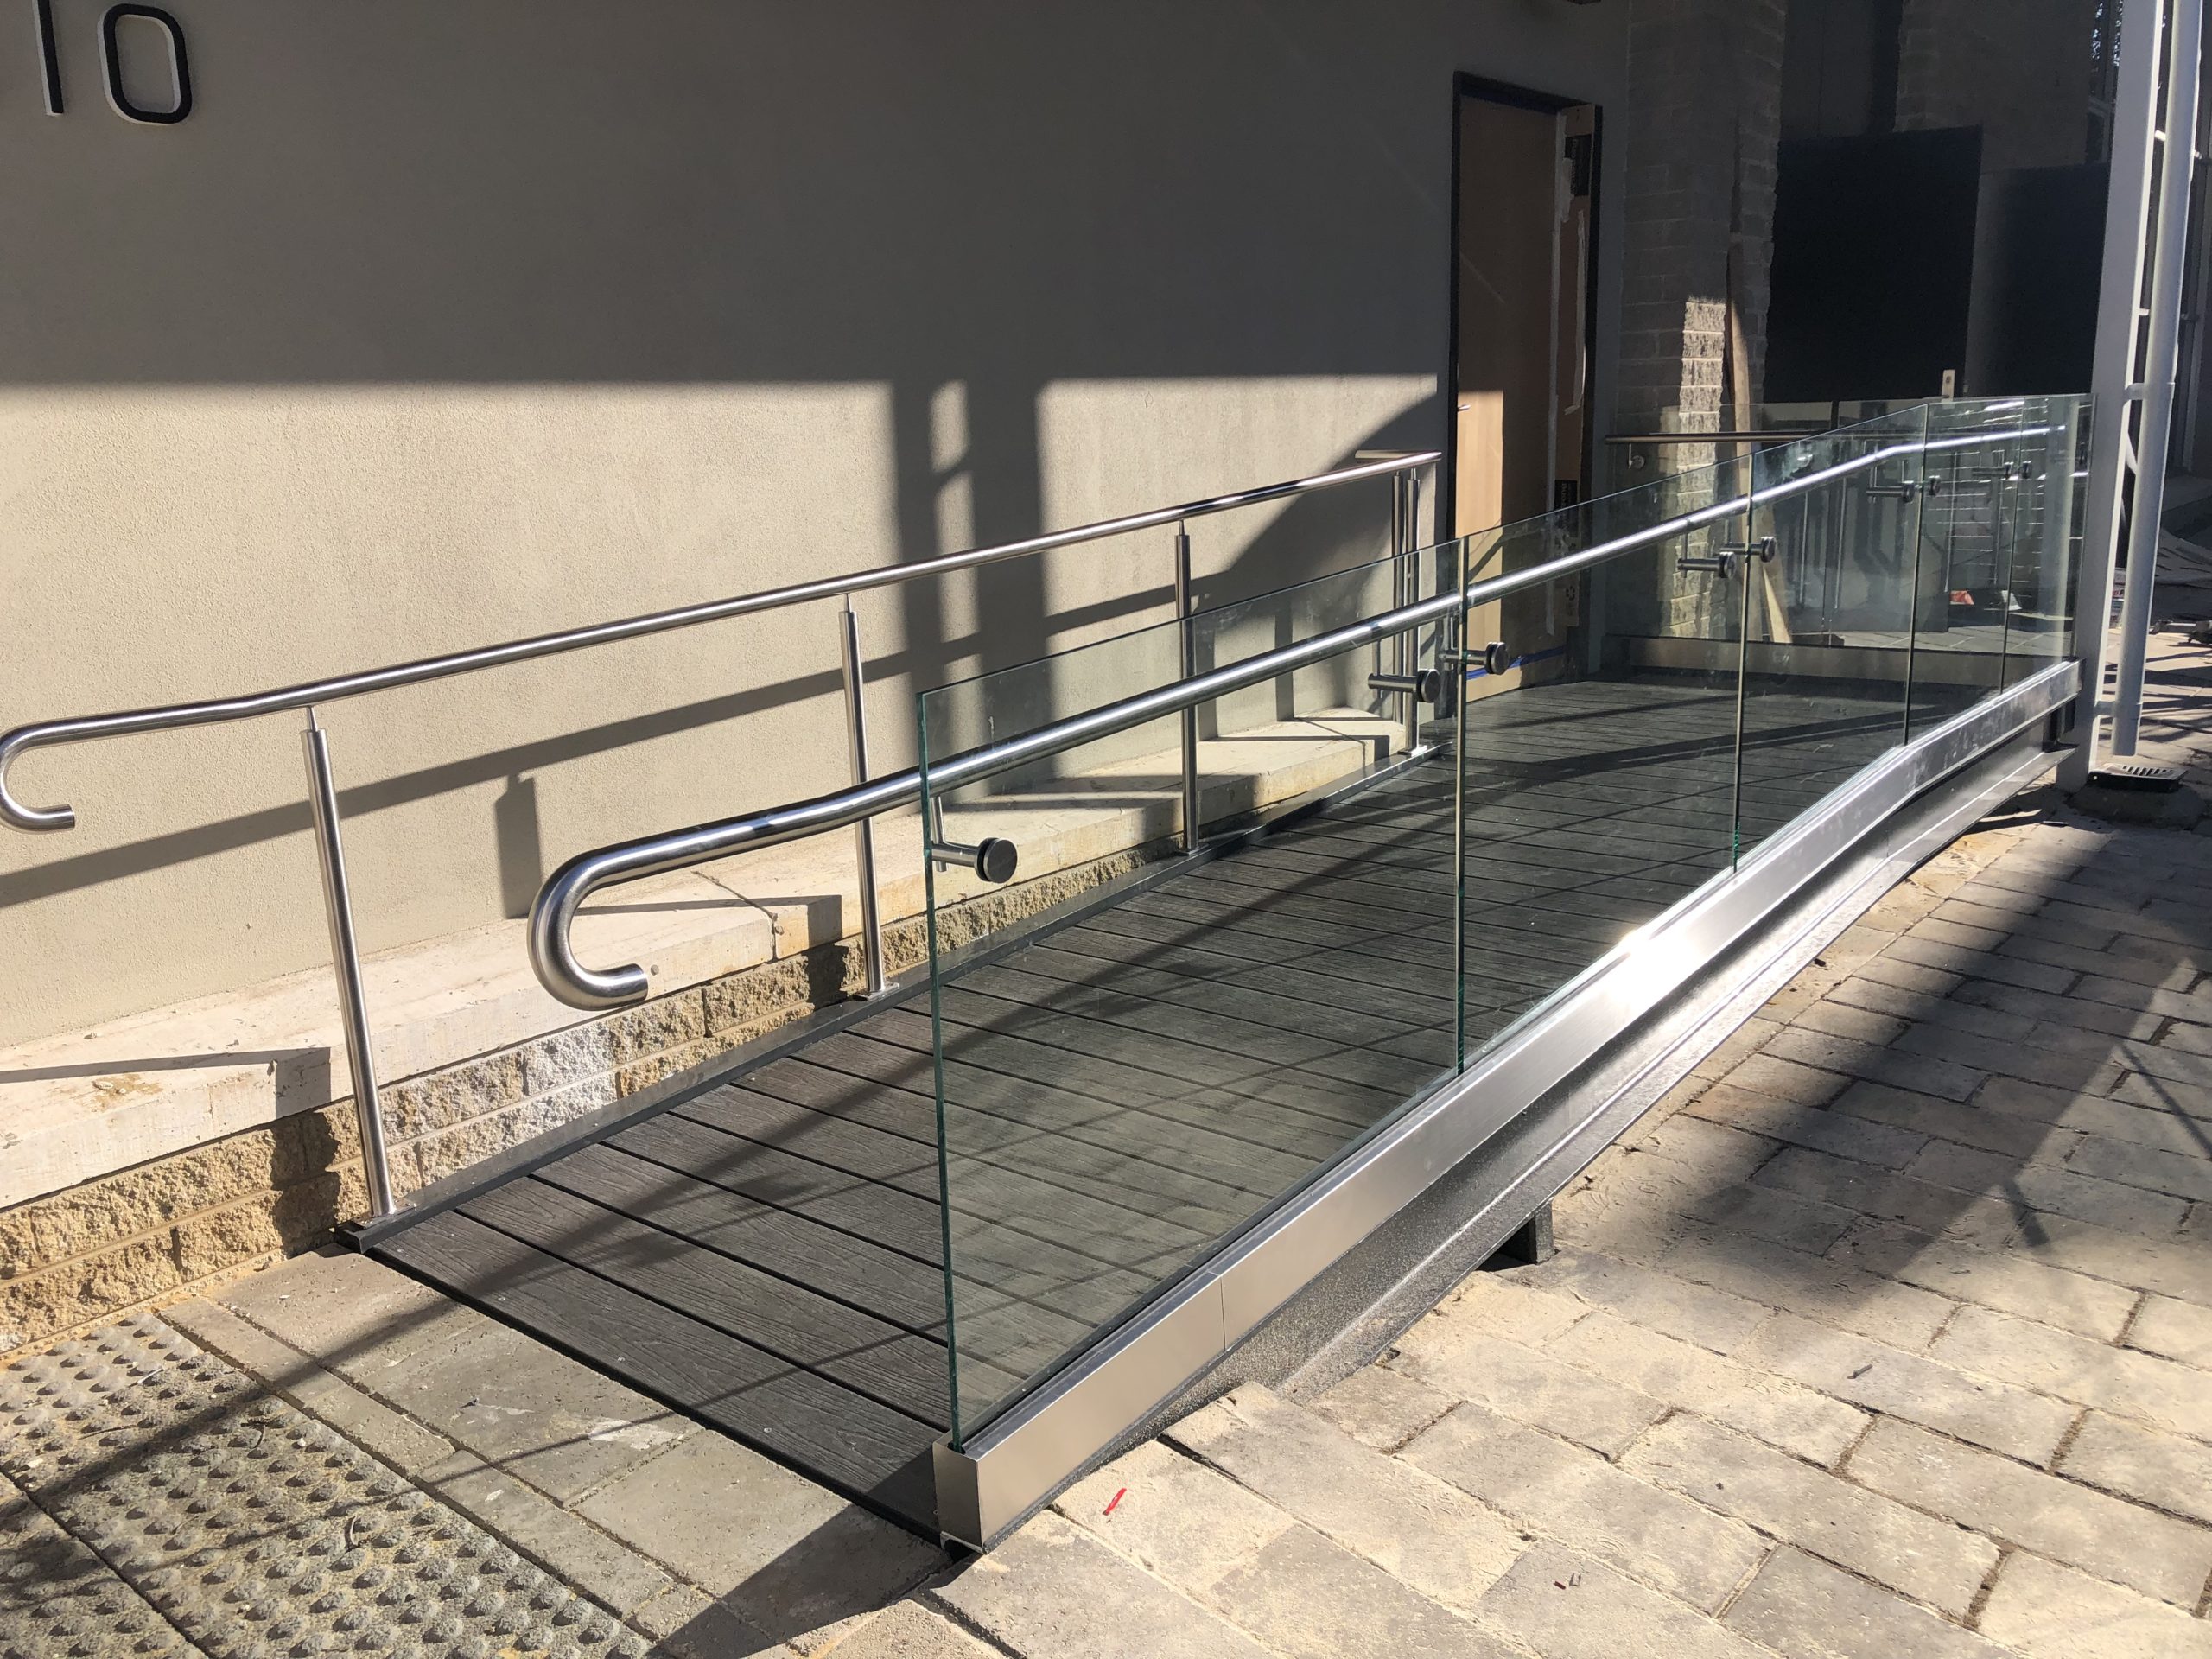 Wheelchair Ramps Requirements You, What Are The Requirements For Wheelchair Ramps